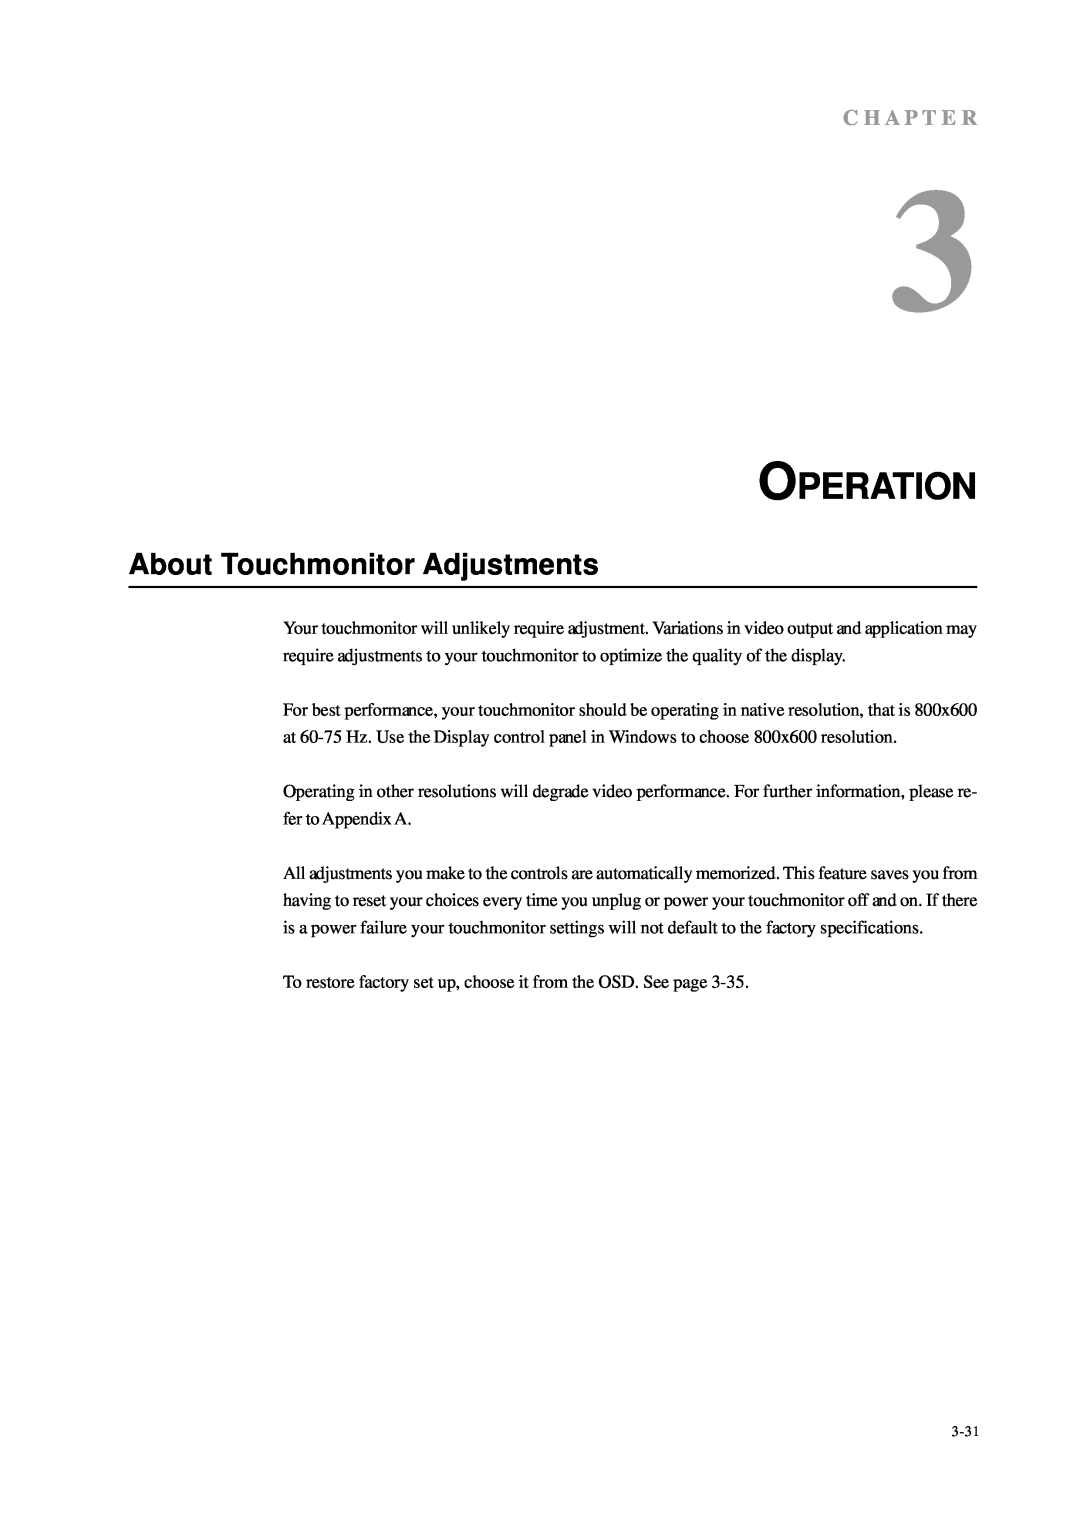 Tyco Electronics 1229L manual Operation, About Touchmonitor Adjustments, C H A P T E R 